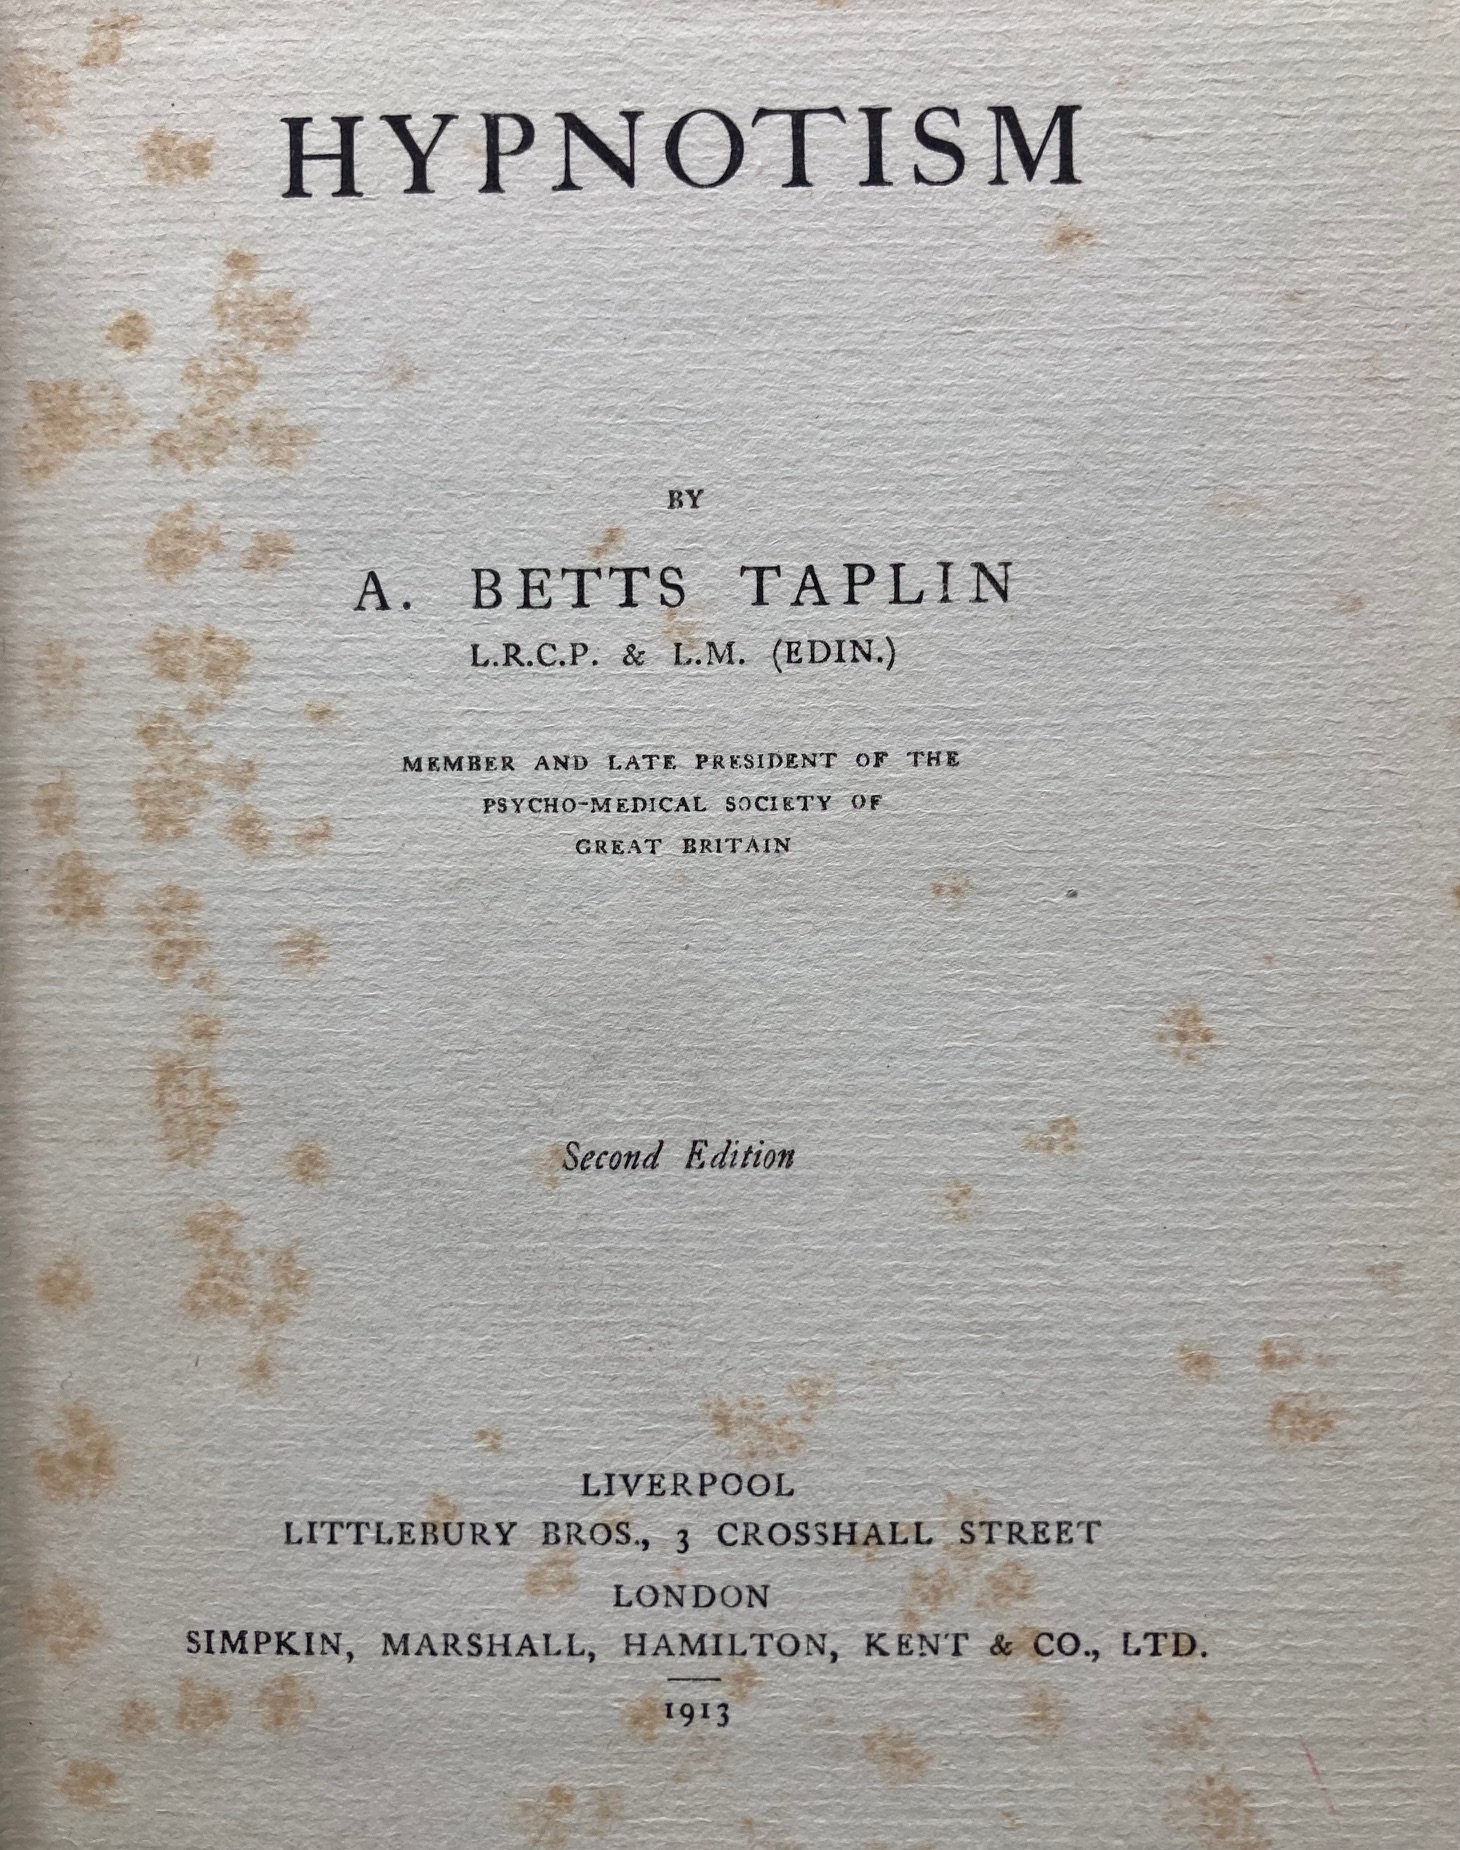 Title page of book: hypnotism by A. Betts Taplin.